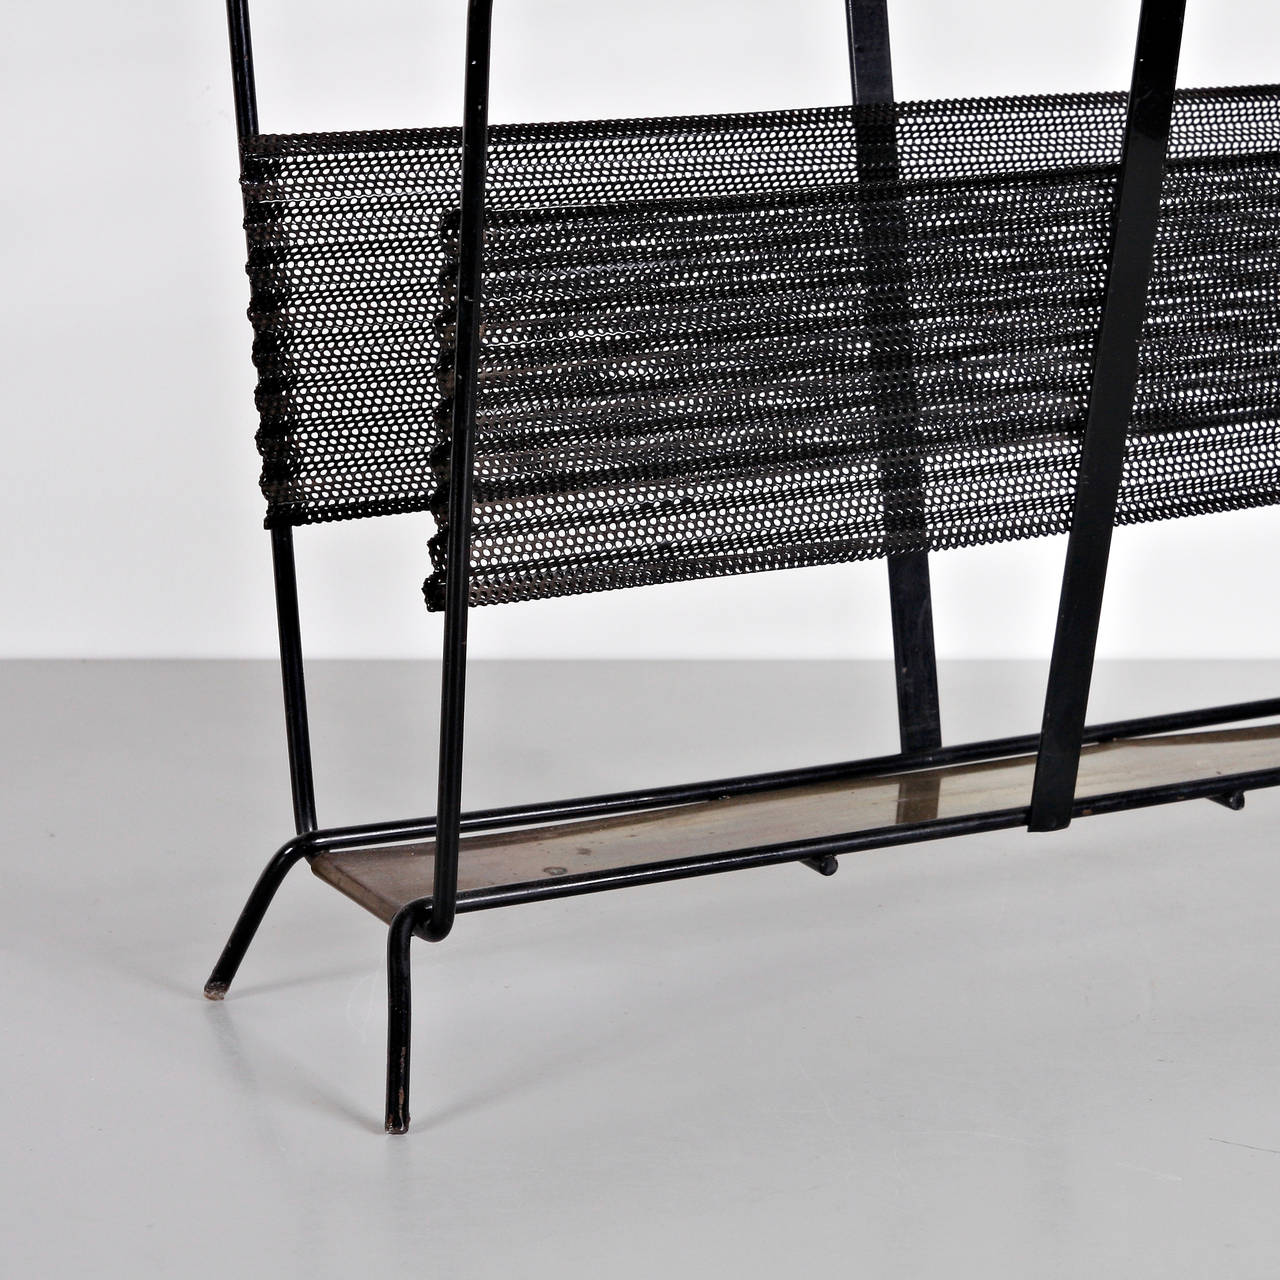 Magazine holder designed by Mathieu Matégot.
Model Harpers.
Manufactured by Ateliers Matégot (France) circa 1950.
Folded, perforated metal lacquered in black and brass detail.

In good original condition, with minor wear consistent with age and